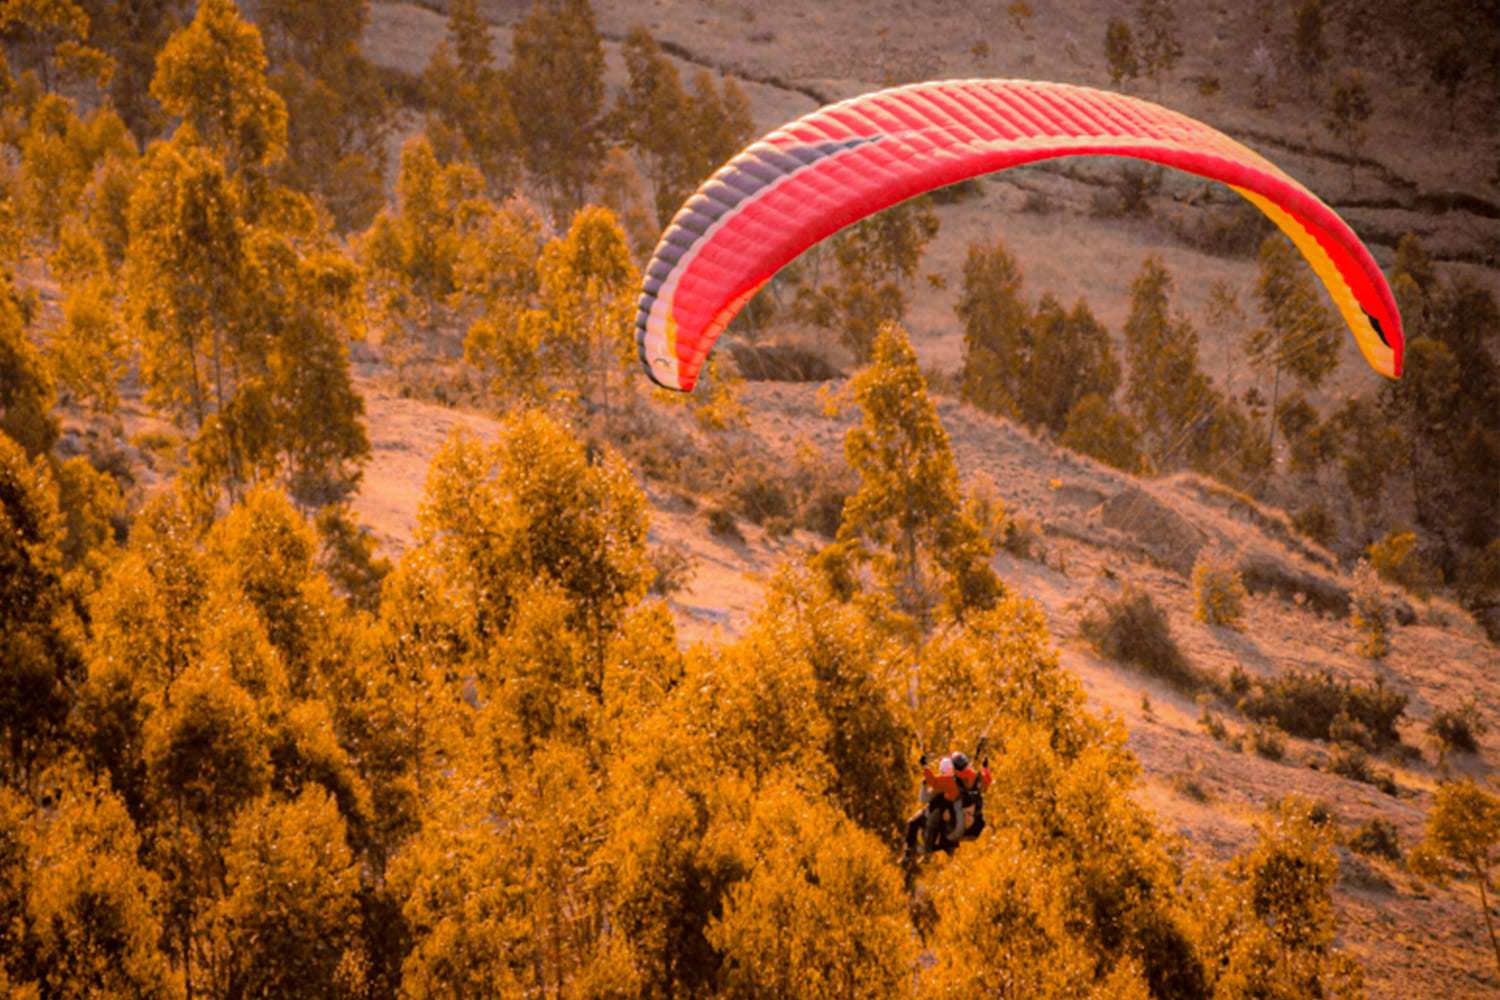 5.- ADVENTURE SPORTS IN CUSCO: PARAGLIDING IN THE SACRED VALLEY